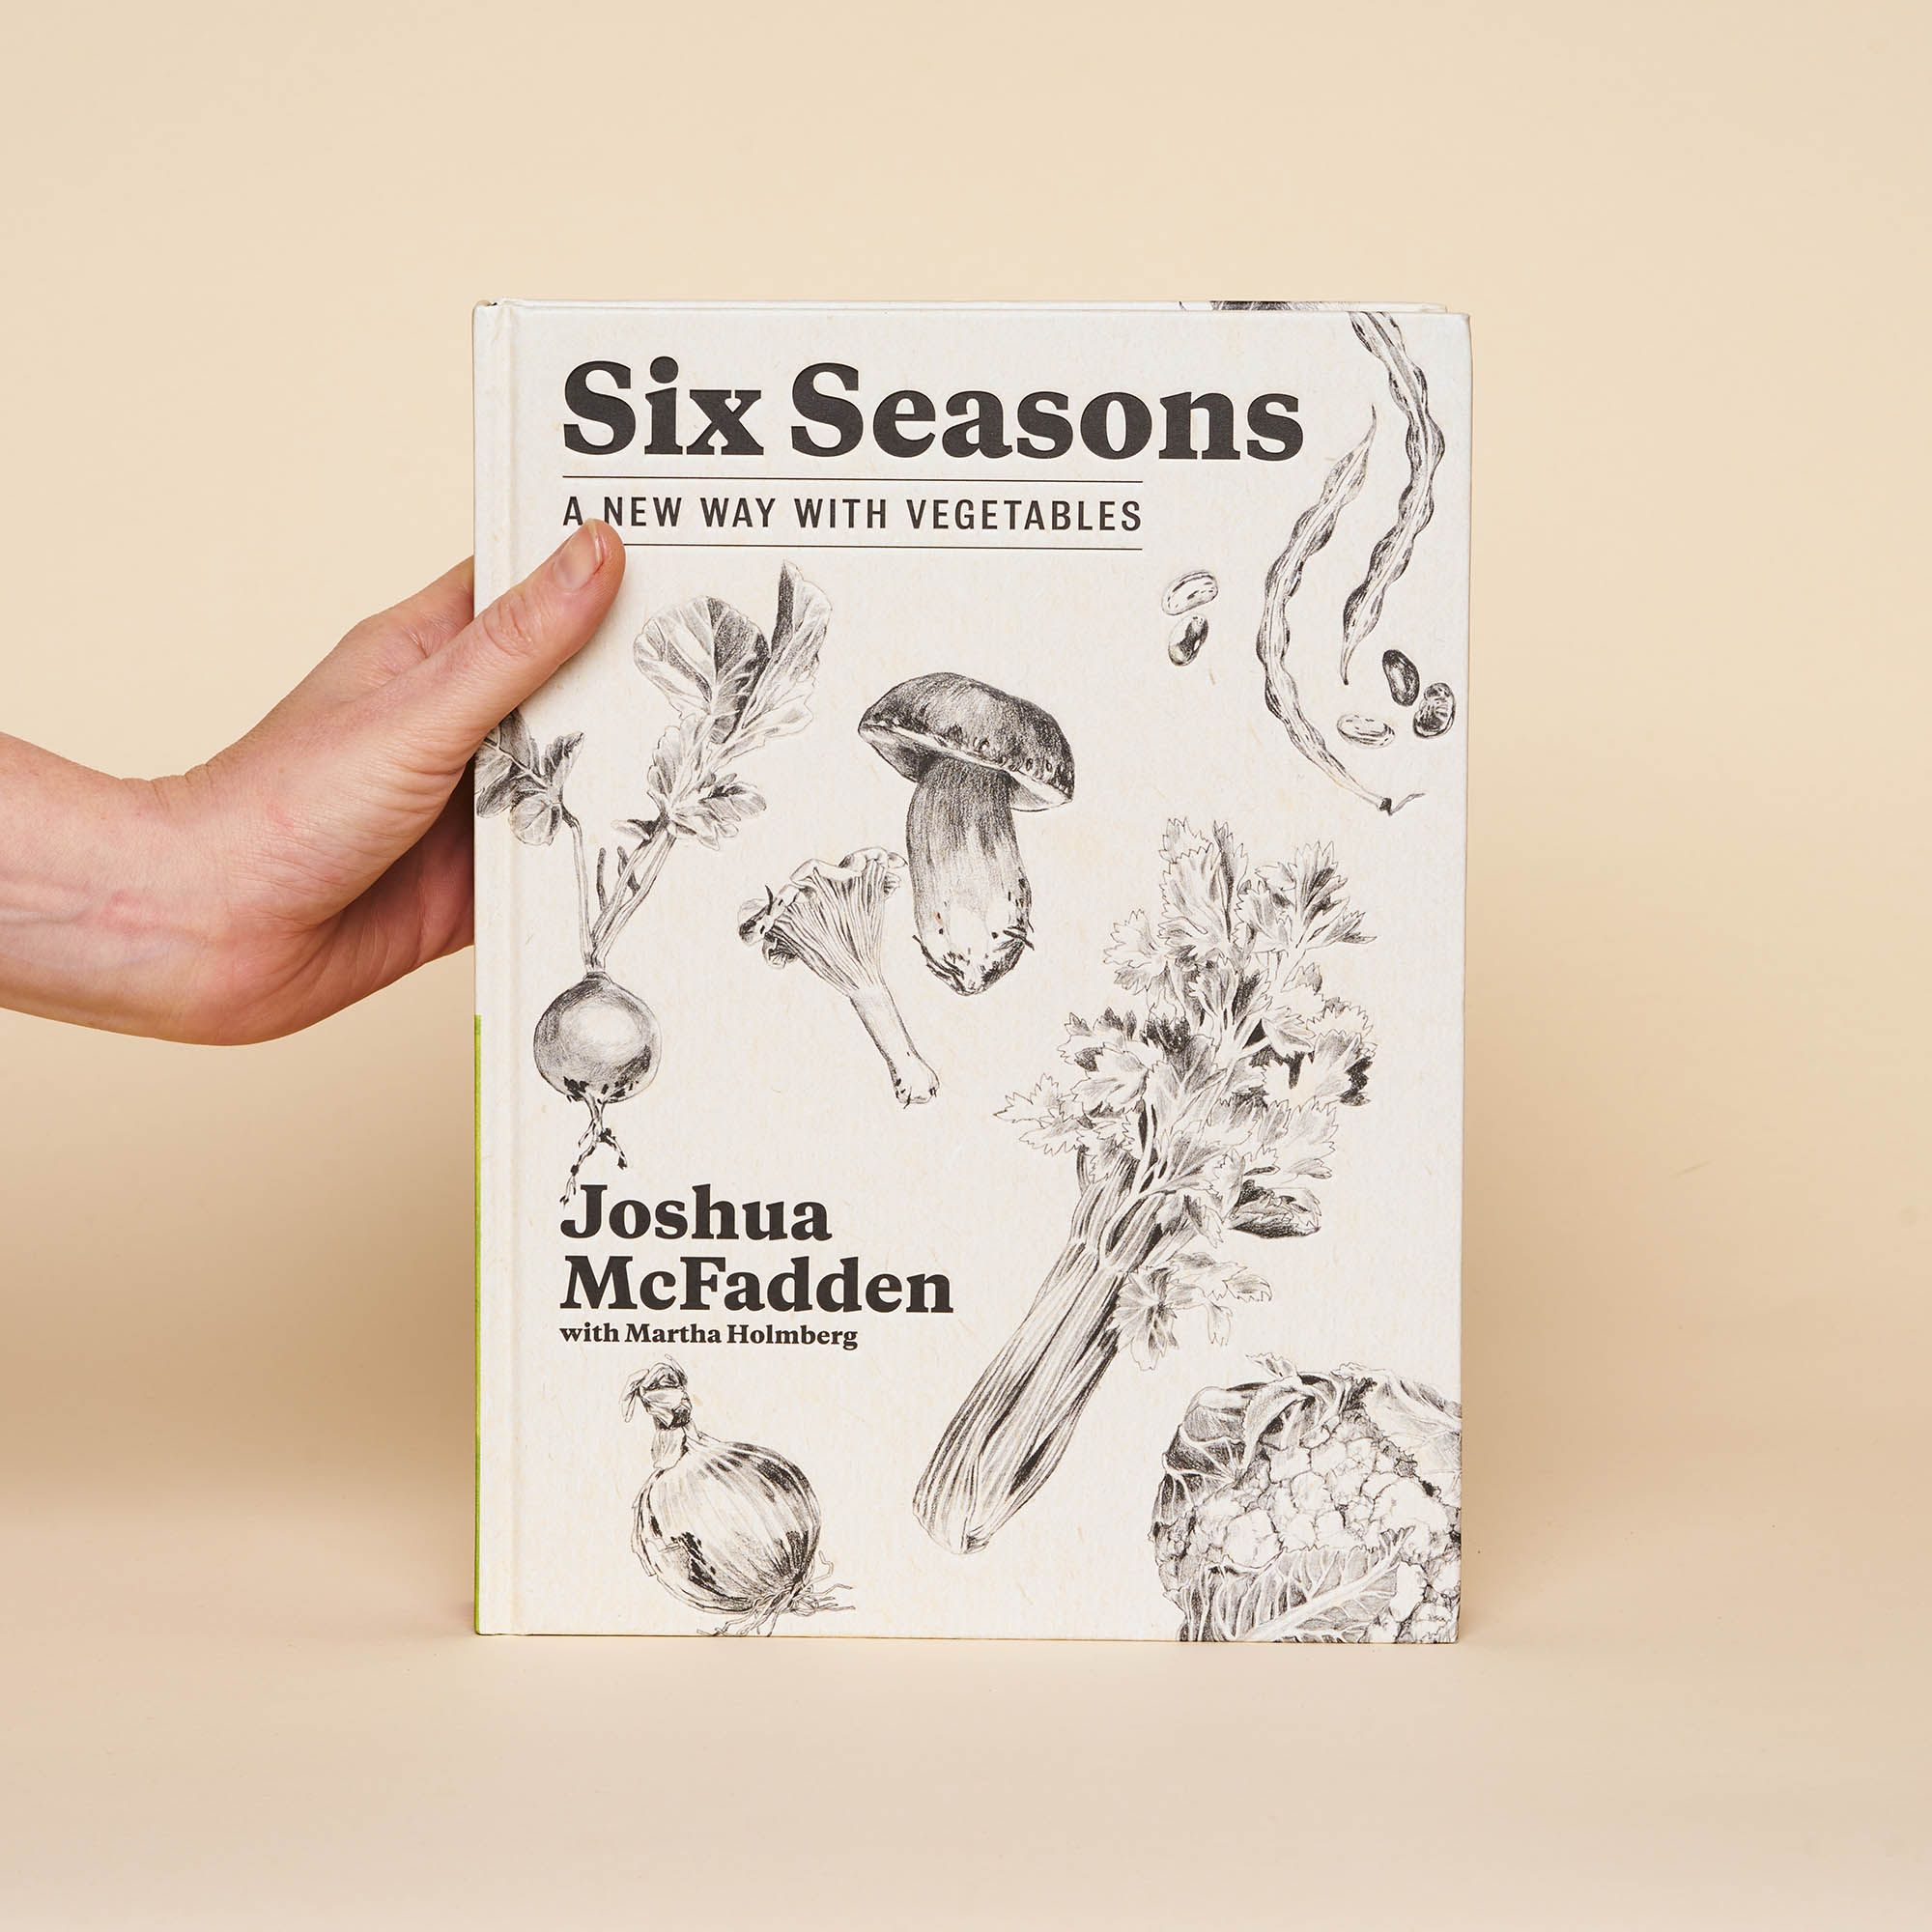 A hand holds an off-white cookbook with delicate illustrations of beets, onions, mushrooms, green beans and celery